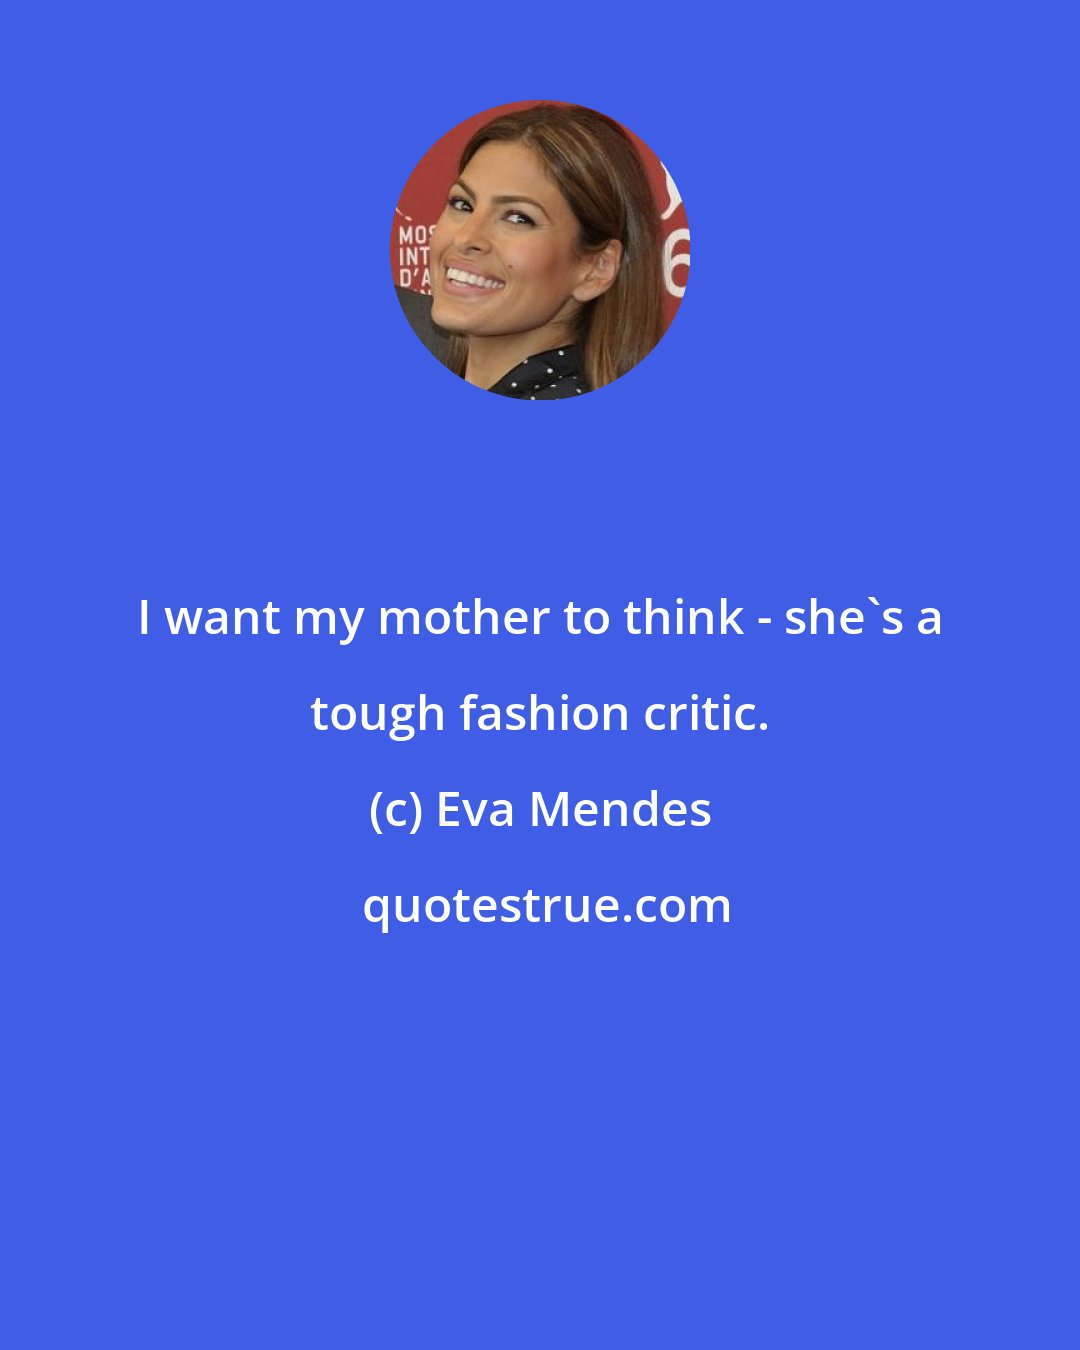 Eva Mendes: I want my mother to think - she's a tough fashion critic.